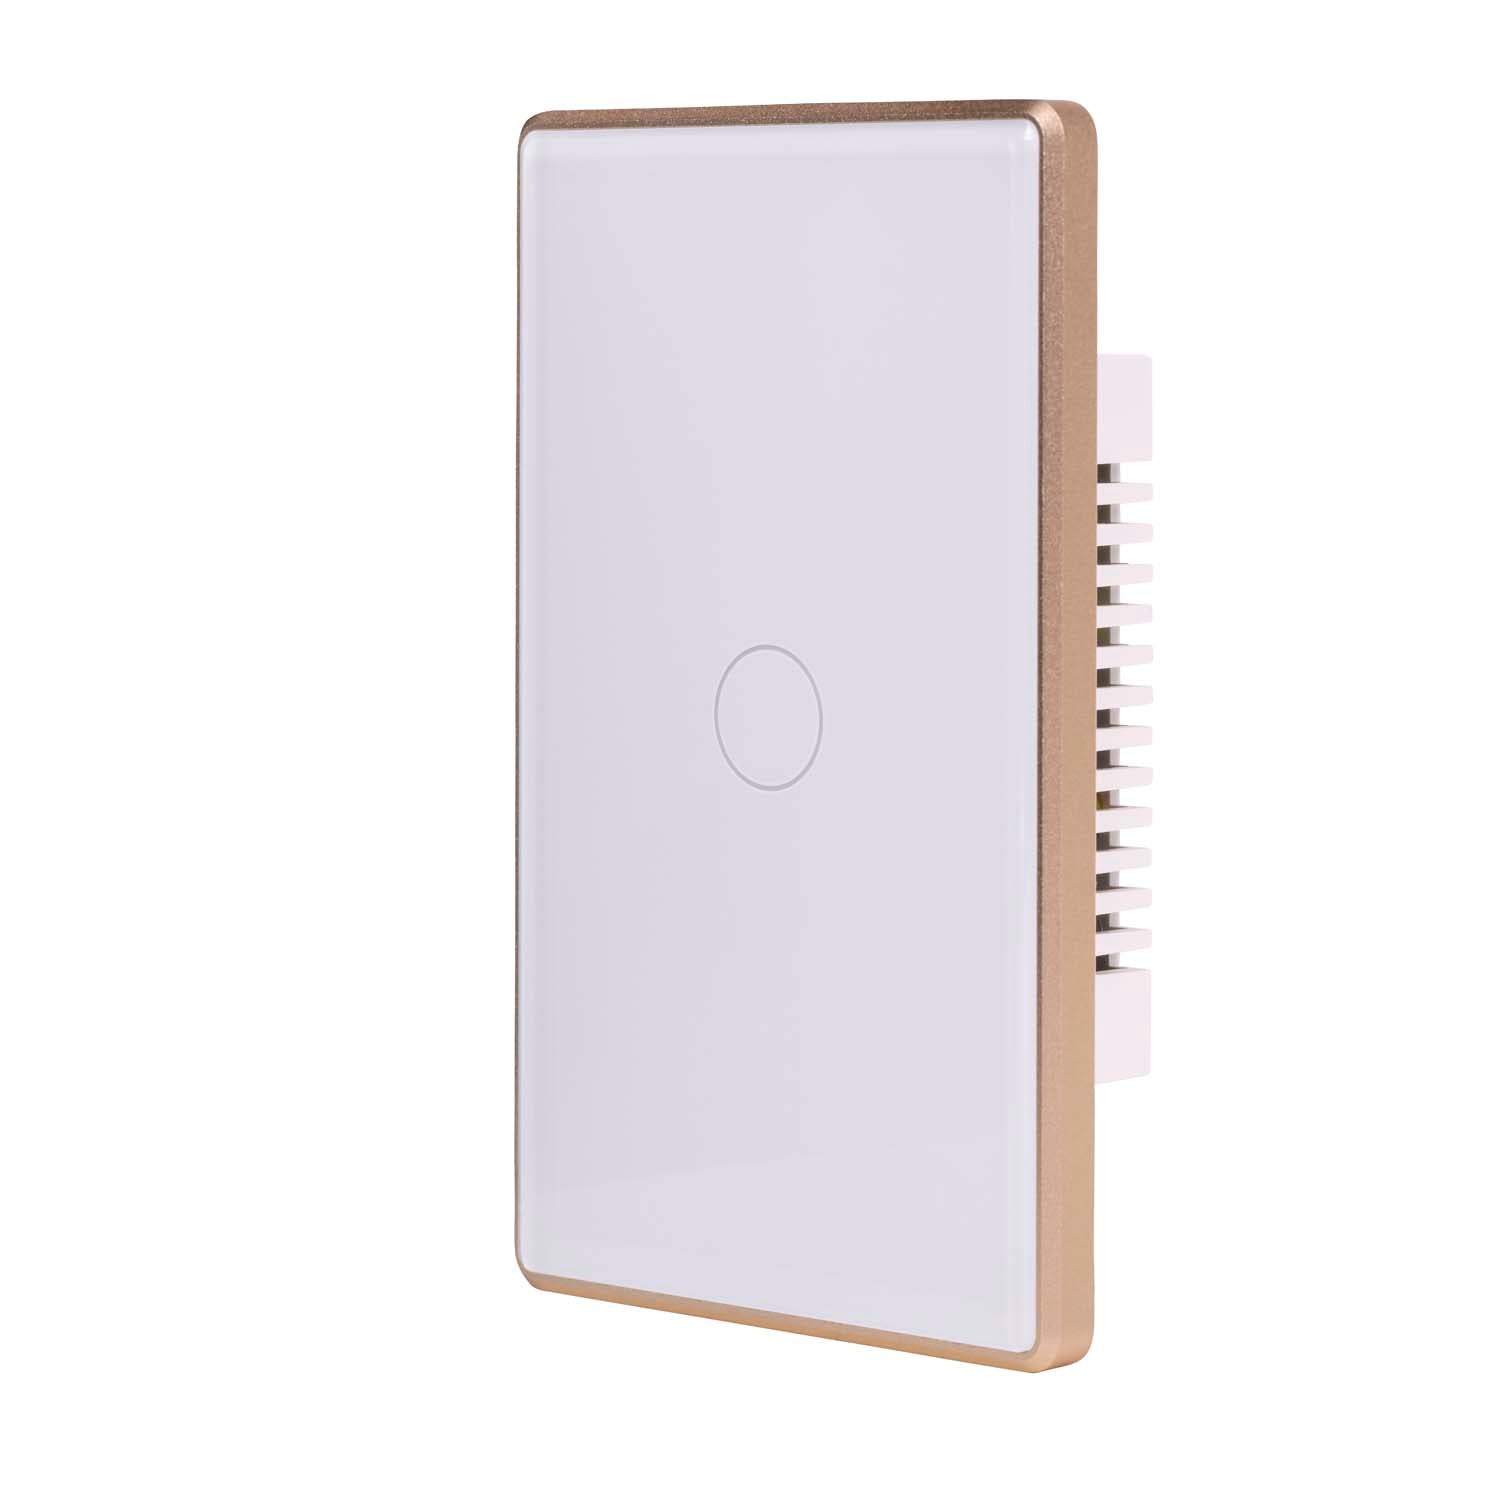 HV9120-1 - Wifi Single Gang White with Gold Trim Wall Switch